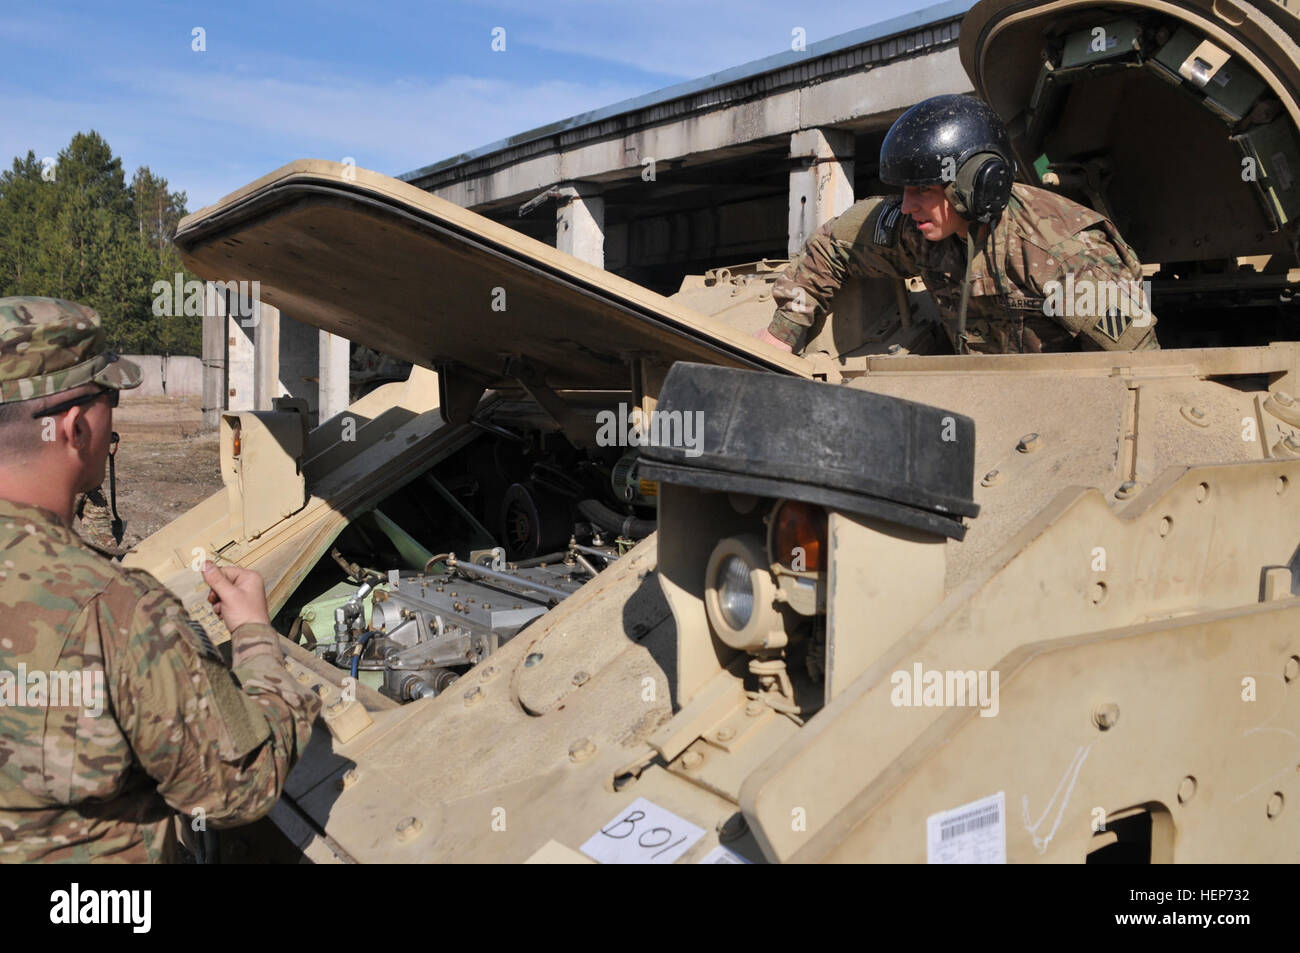 Soldiers of the 2nd Battalion, 7th Infantry Regiment, 1st Armored Brigade Combat Team, 3d Infantry Division out of Fort Stewart, Ga., Readied their equipment upon arrival at Adazi Military Base, Latvia, on March 17, 2015. The unit was  deployed throughout the Baltic region in support of Operation Atlantic Resolve and will be taking over for the 3rd Squadron, 2nd Cavalry Regiment. 1st Brigade, 3rd Infantry Division is the U.S. Army’s current regionally aligned force for Europe. They  will spend the next three months training alongside NATO allies in support of OAR. (U.S. Army photo by Sgt. Aaro Stock Photo